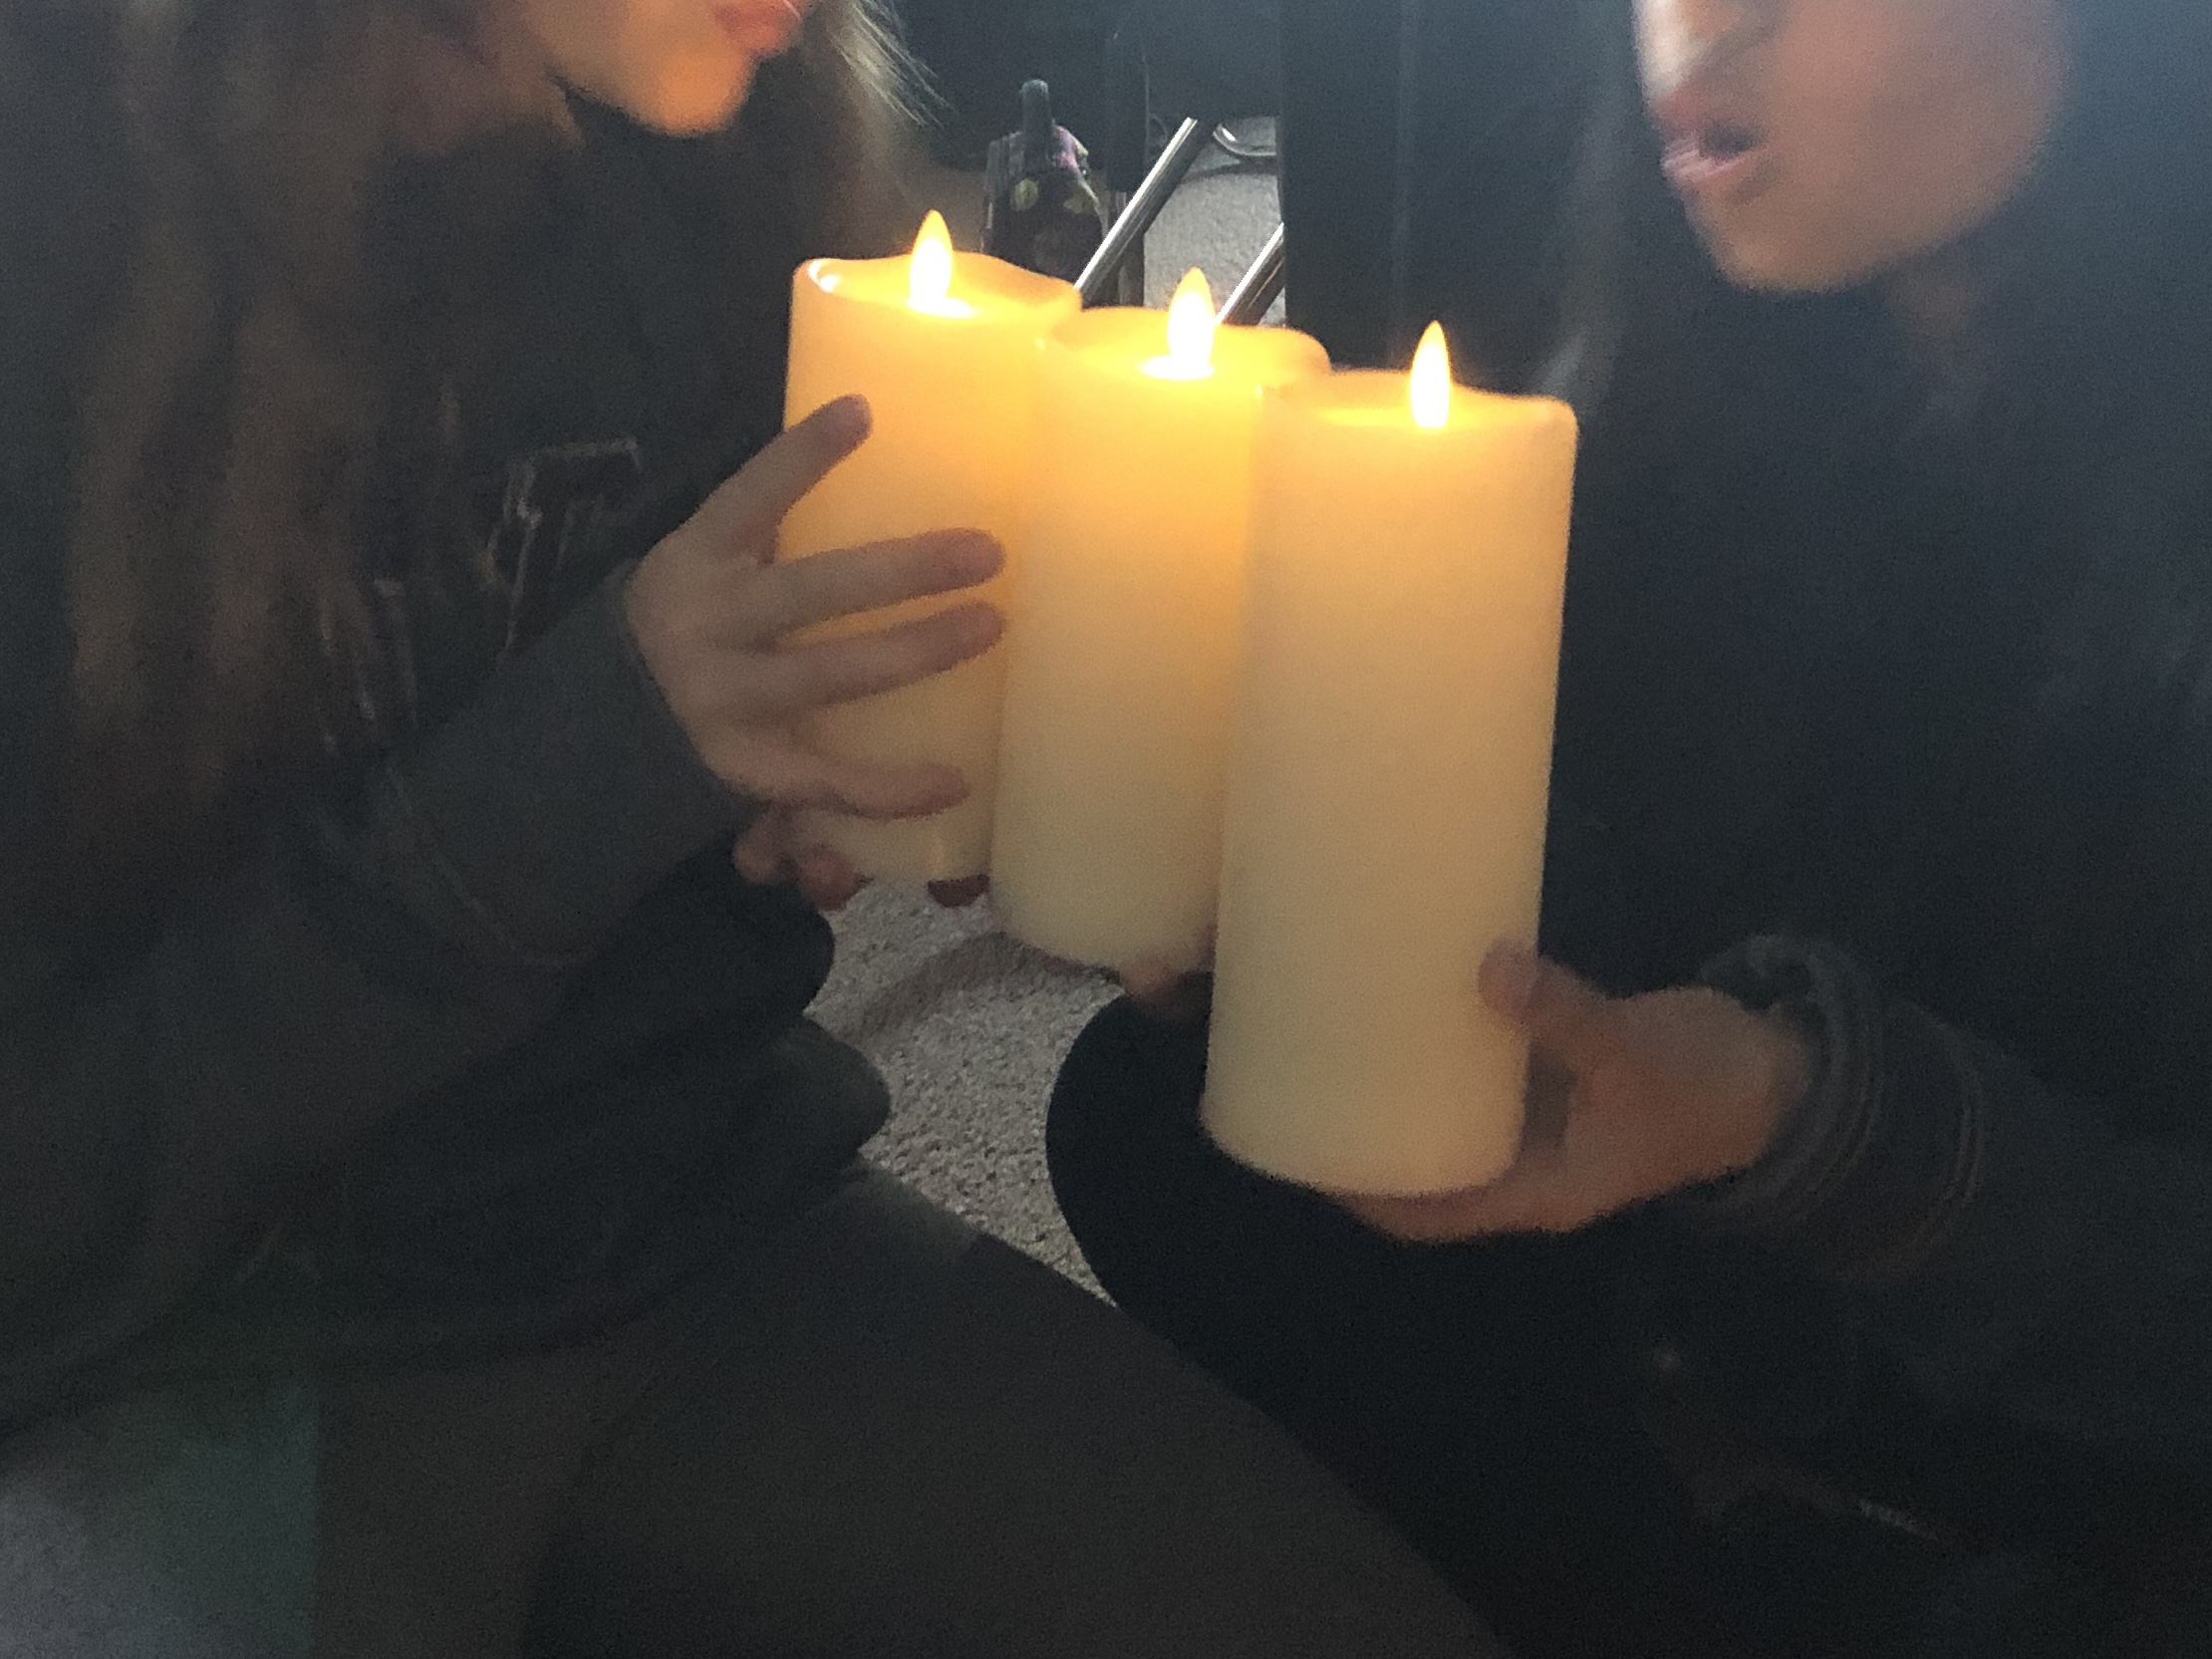 two girls hold battery operated pillar candles and attempt to blow them out